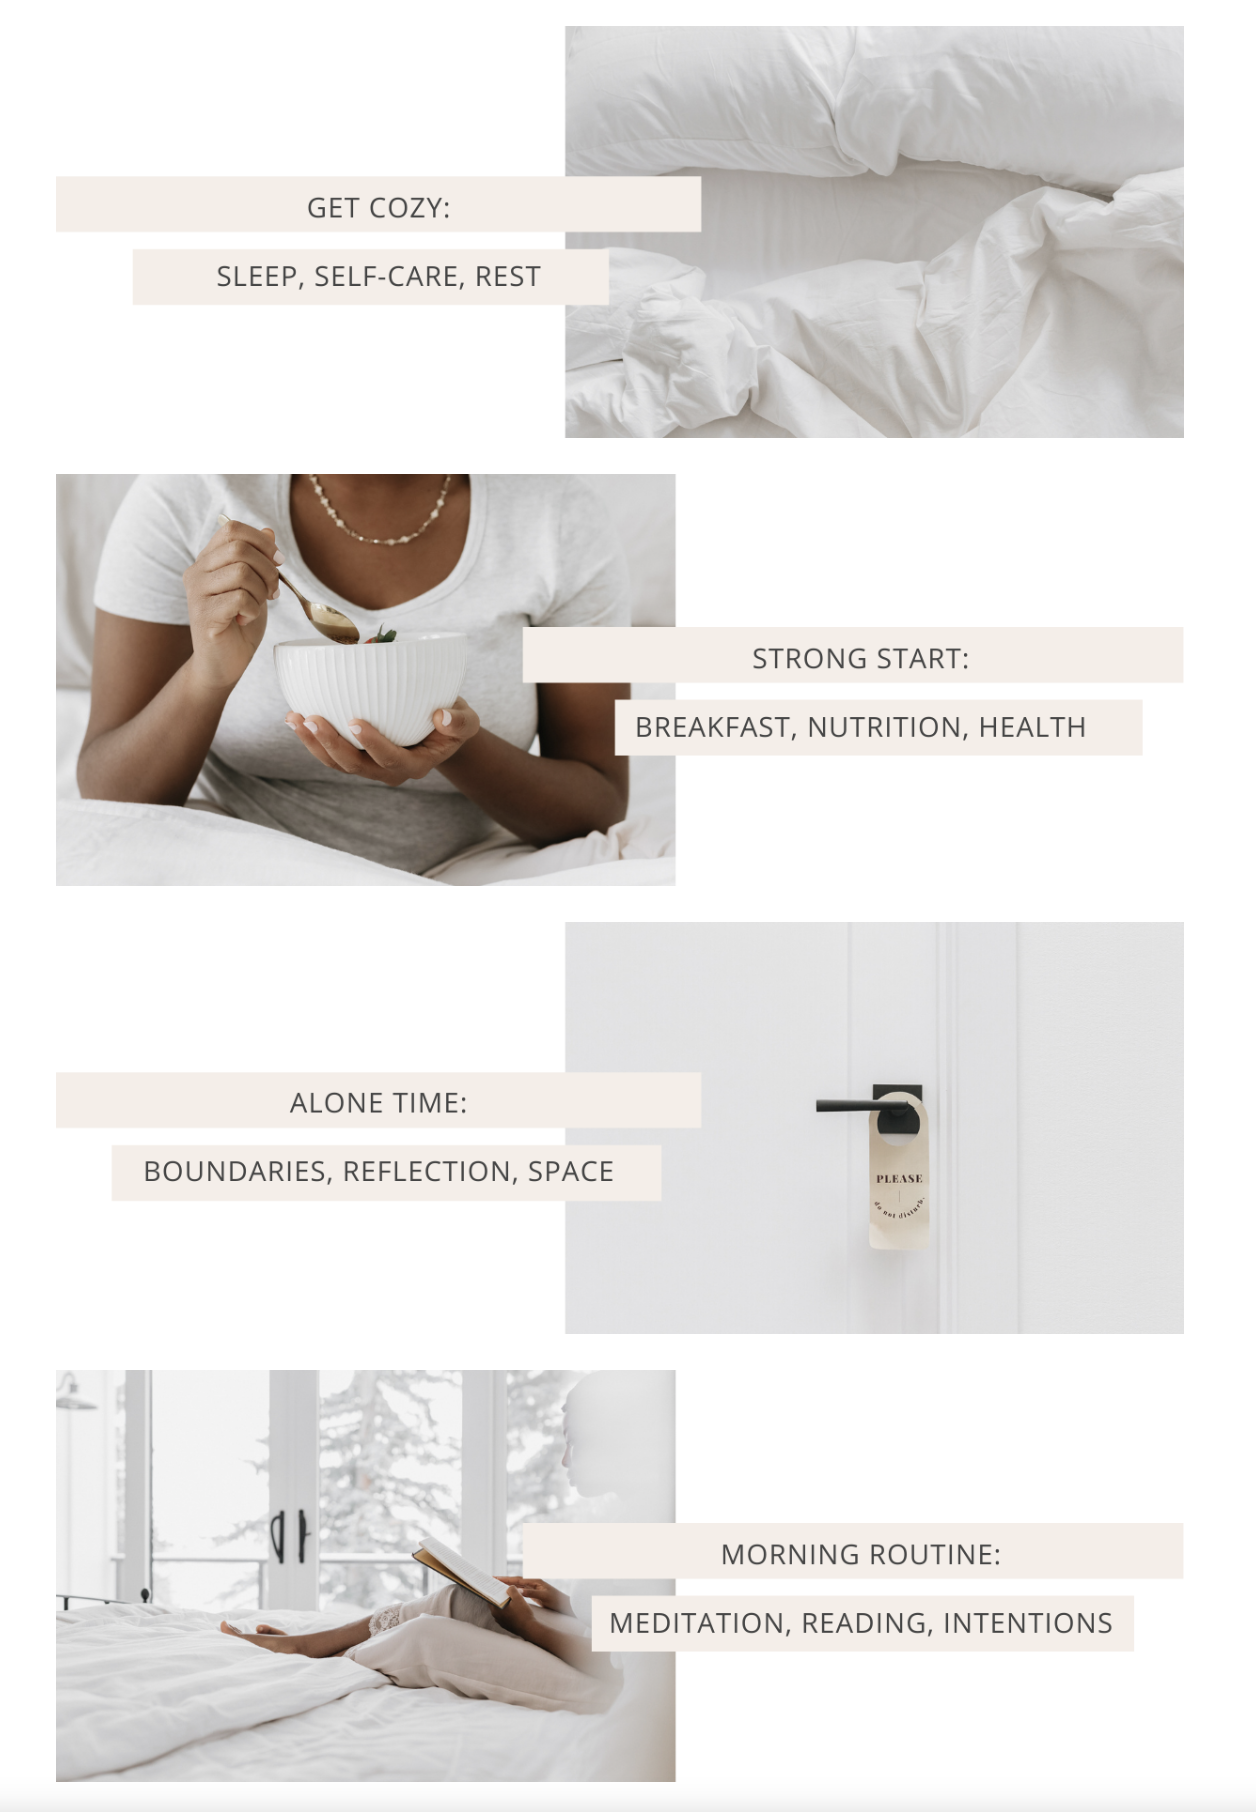 Beauty and skin-care stock photos from Haute Stock. Black woman stock images of beauty and self-care routine. Click to view the entire collection!